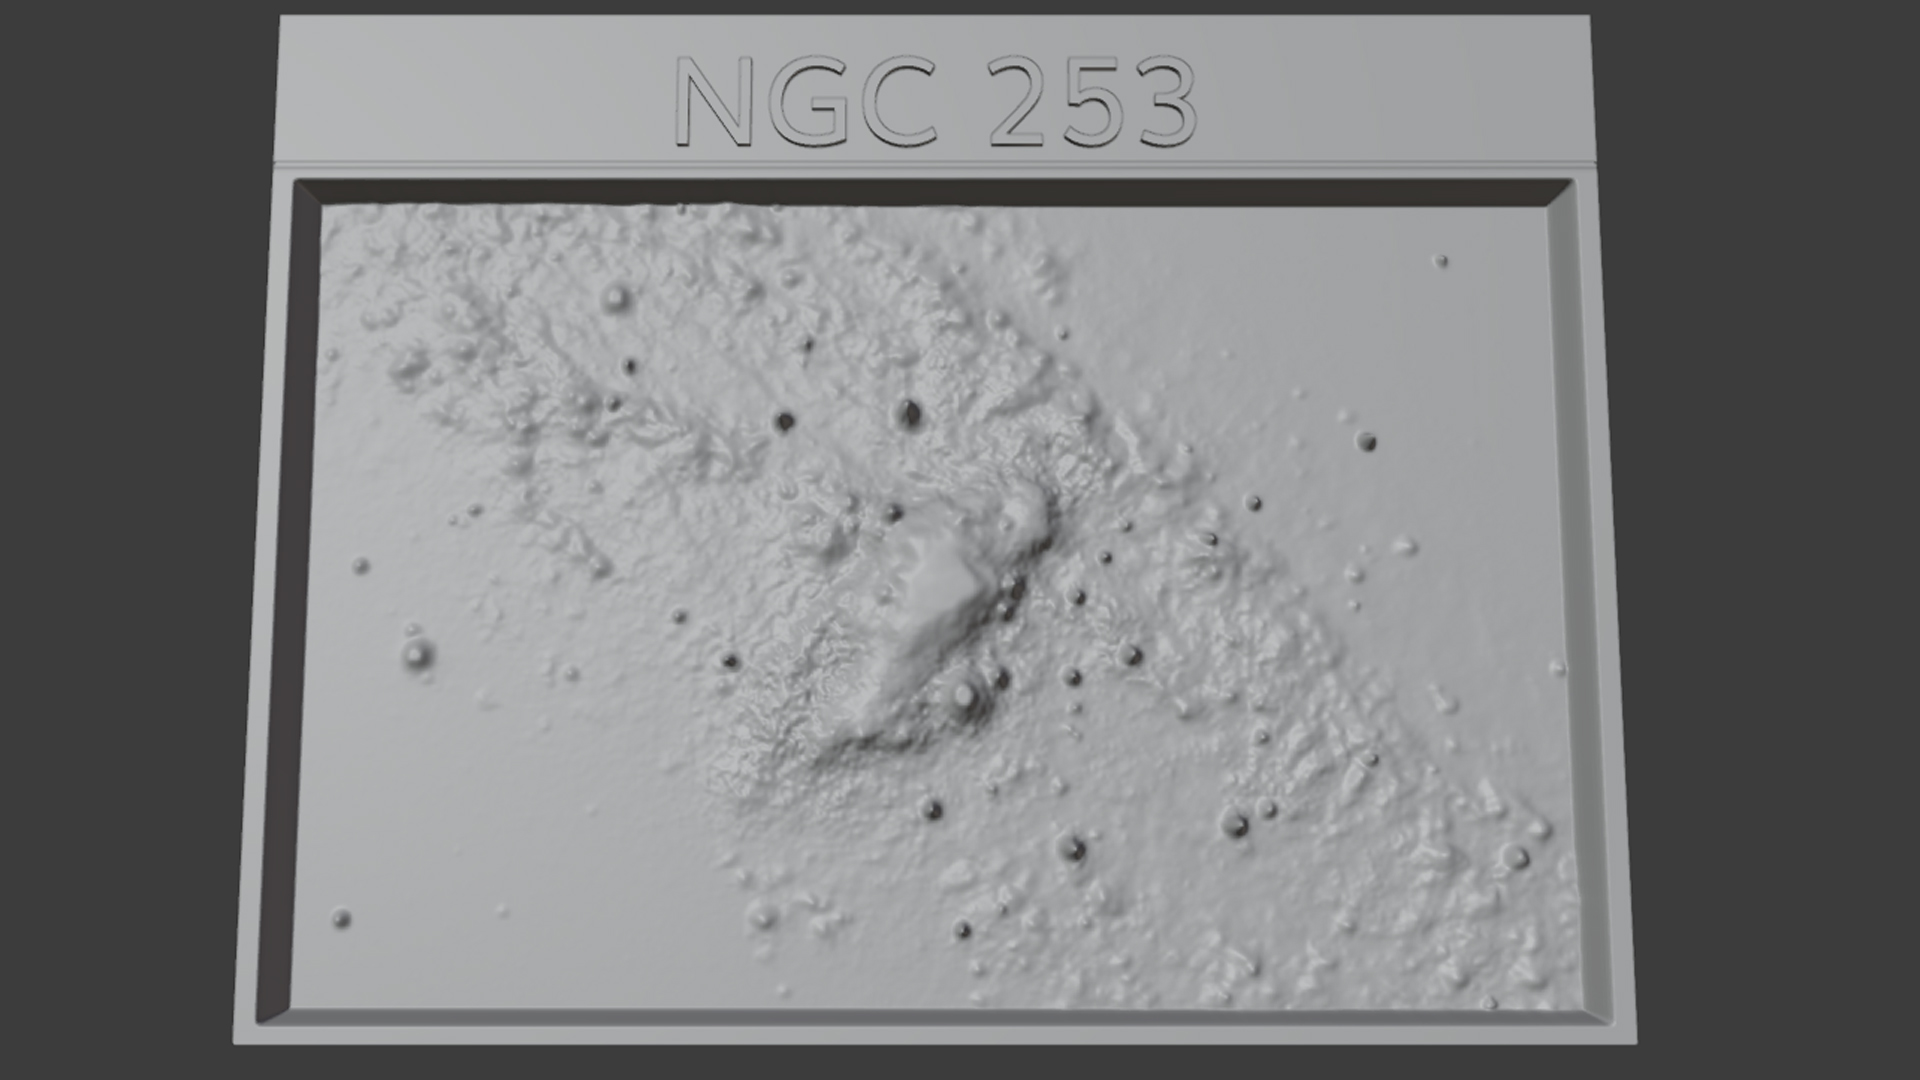 Image of a 3D NGC 253 Composite